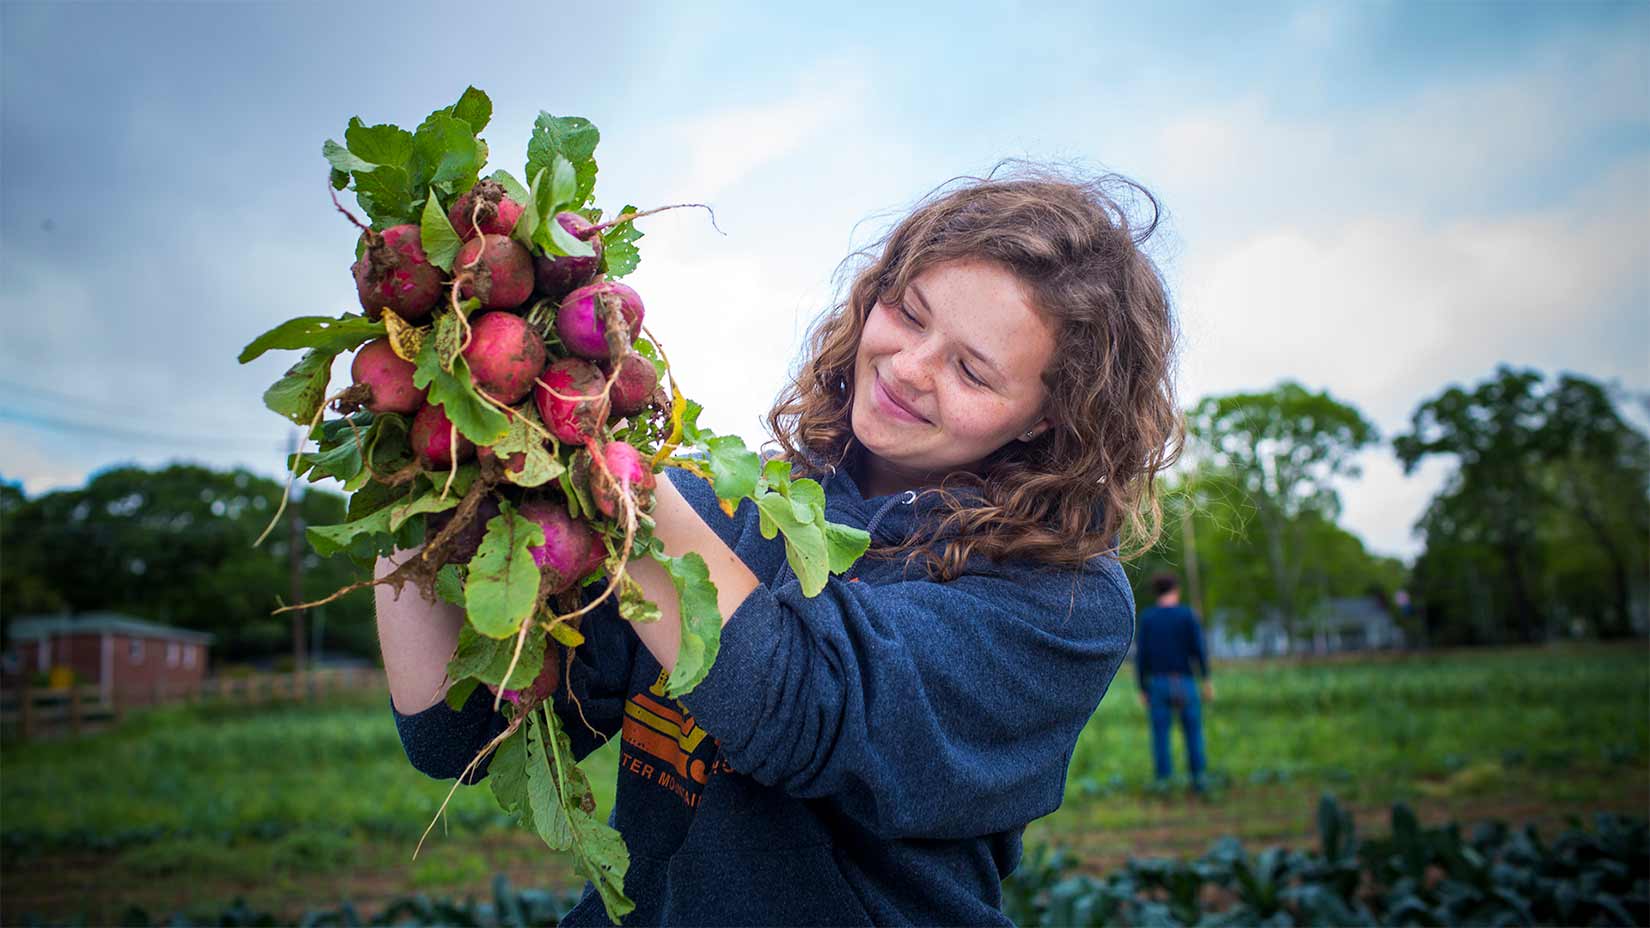 Gratia Sullivan unearths a bunch of radishes destined for the campus kitchens and community consumers.